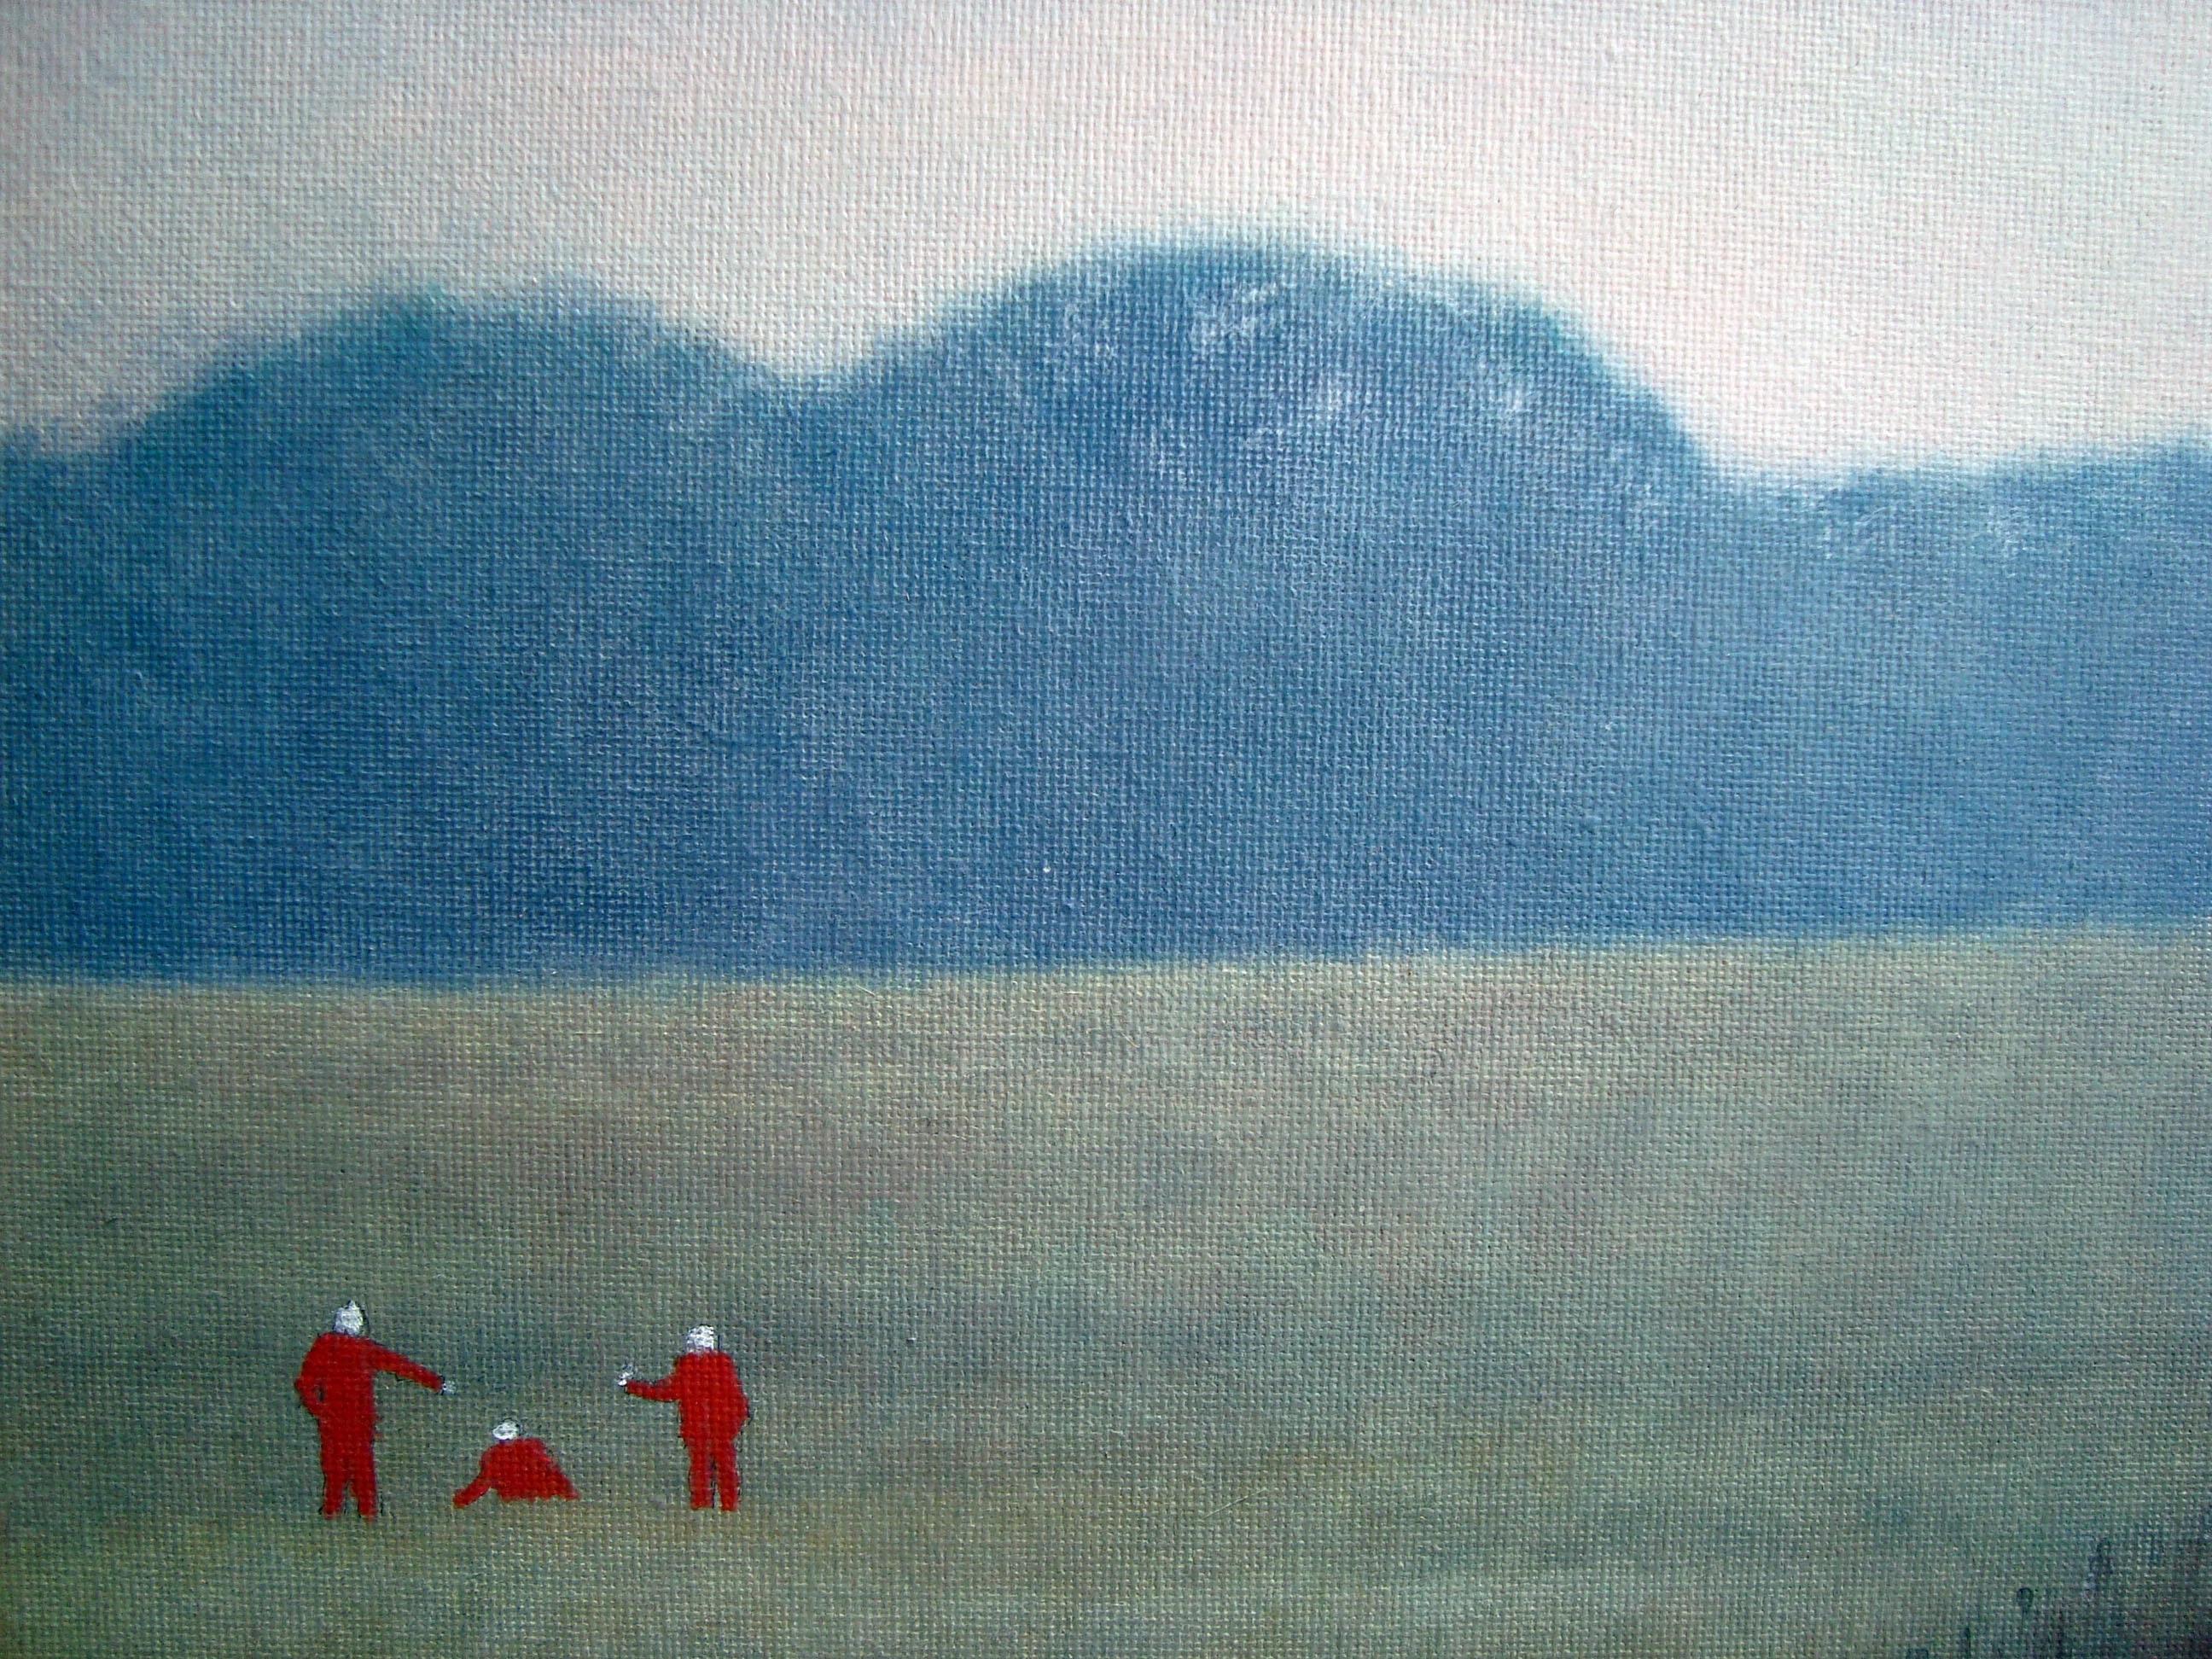 3 people digging in the field... are they finding or hiding something? 

About the artist:

The paintings of Bjarne Dahl are realistic and figurative with inspiration from landscapes, people and buildings. The colours are often subdued, with a